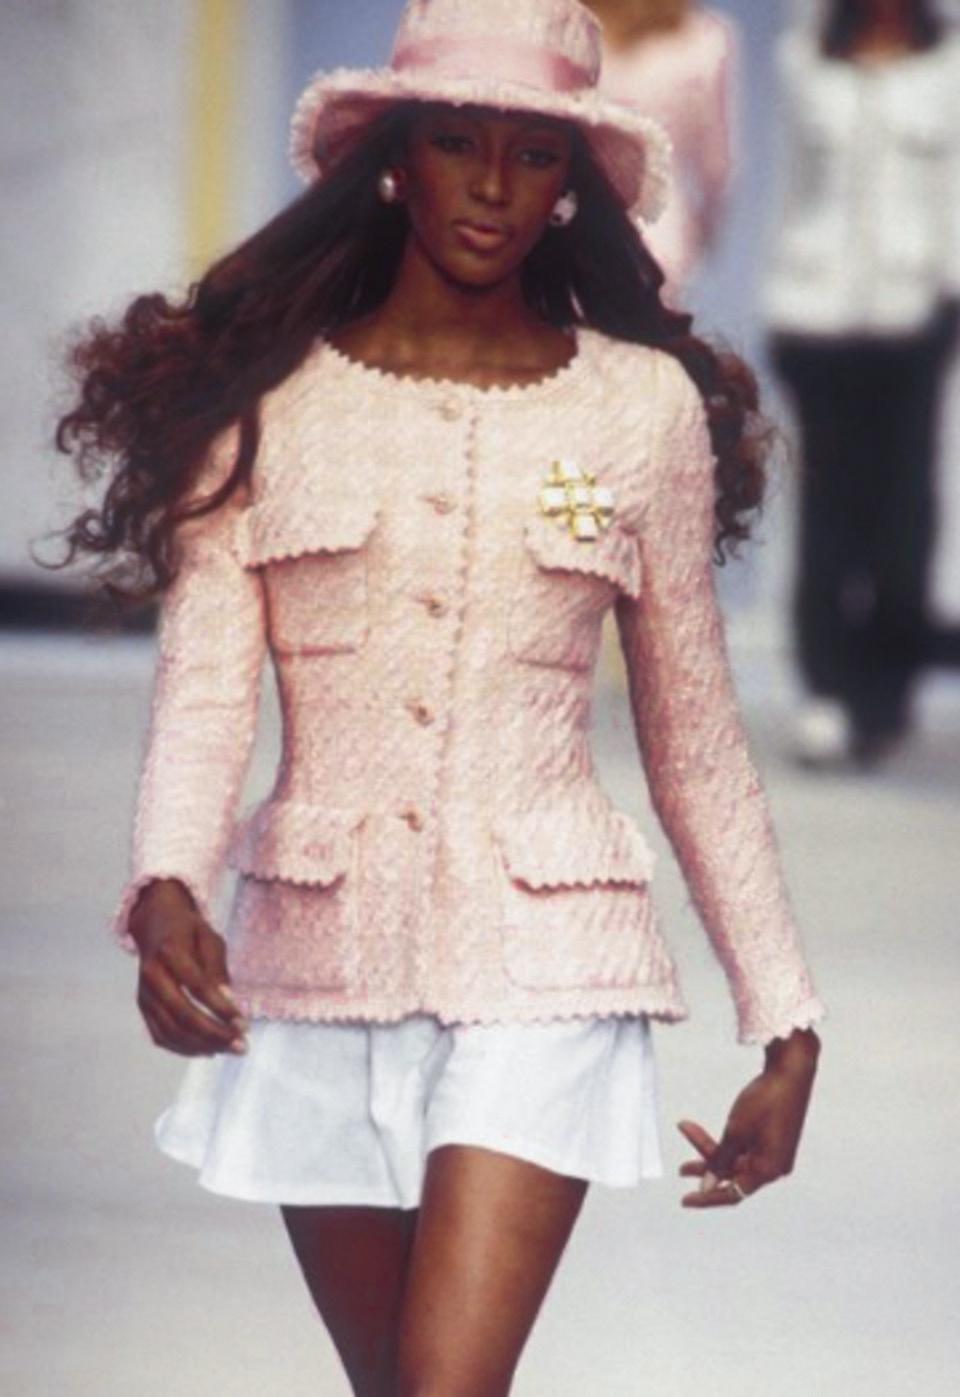 This extremely rare pink tweed jacket from Chanel's 1993 Spring collection is a piece of fashion history. Seen on the iconic Naomi Campbell, this jacket embodies the aesthetic of nineties fashion. The tweed fabric boasts a soft pink hue, four